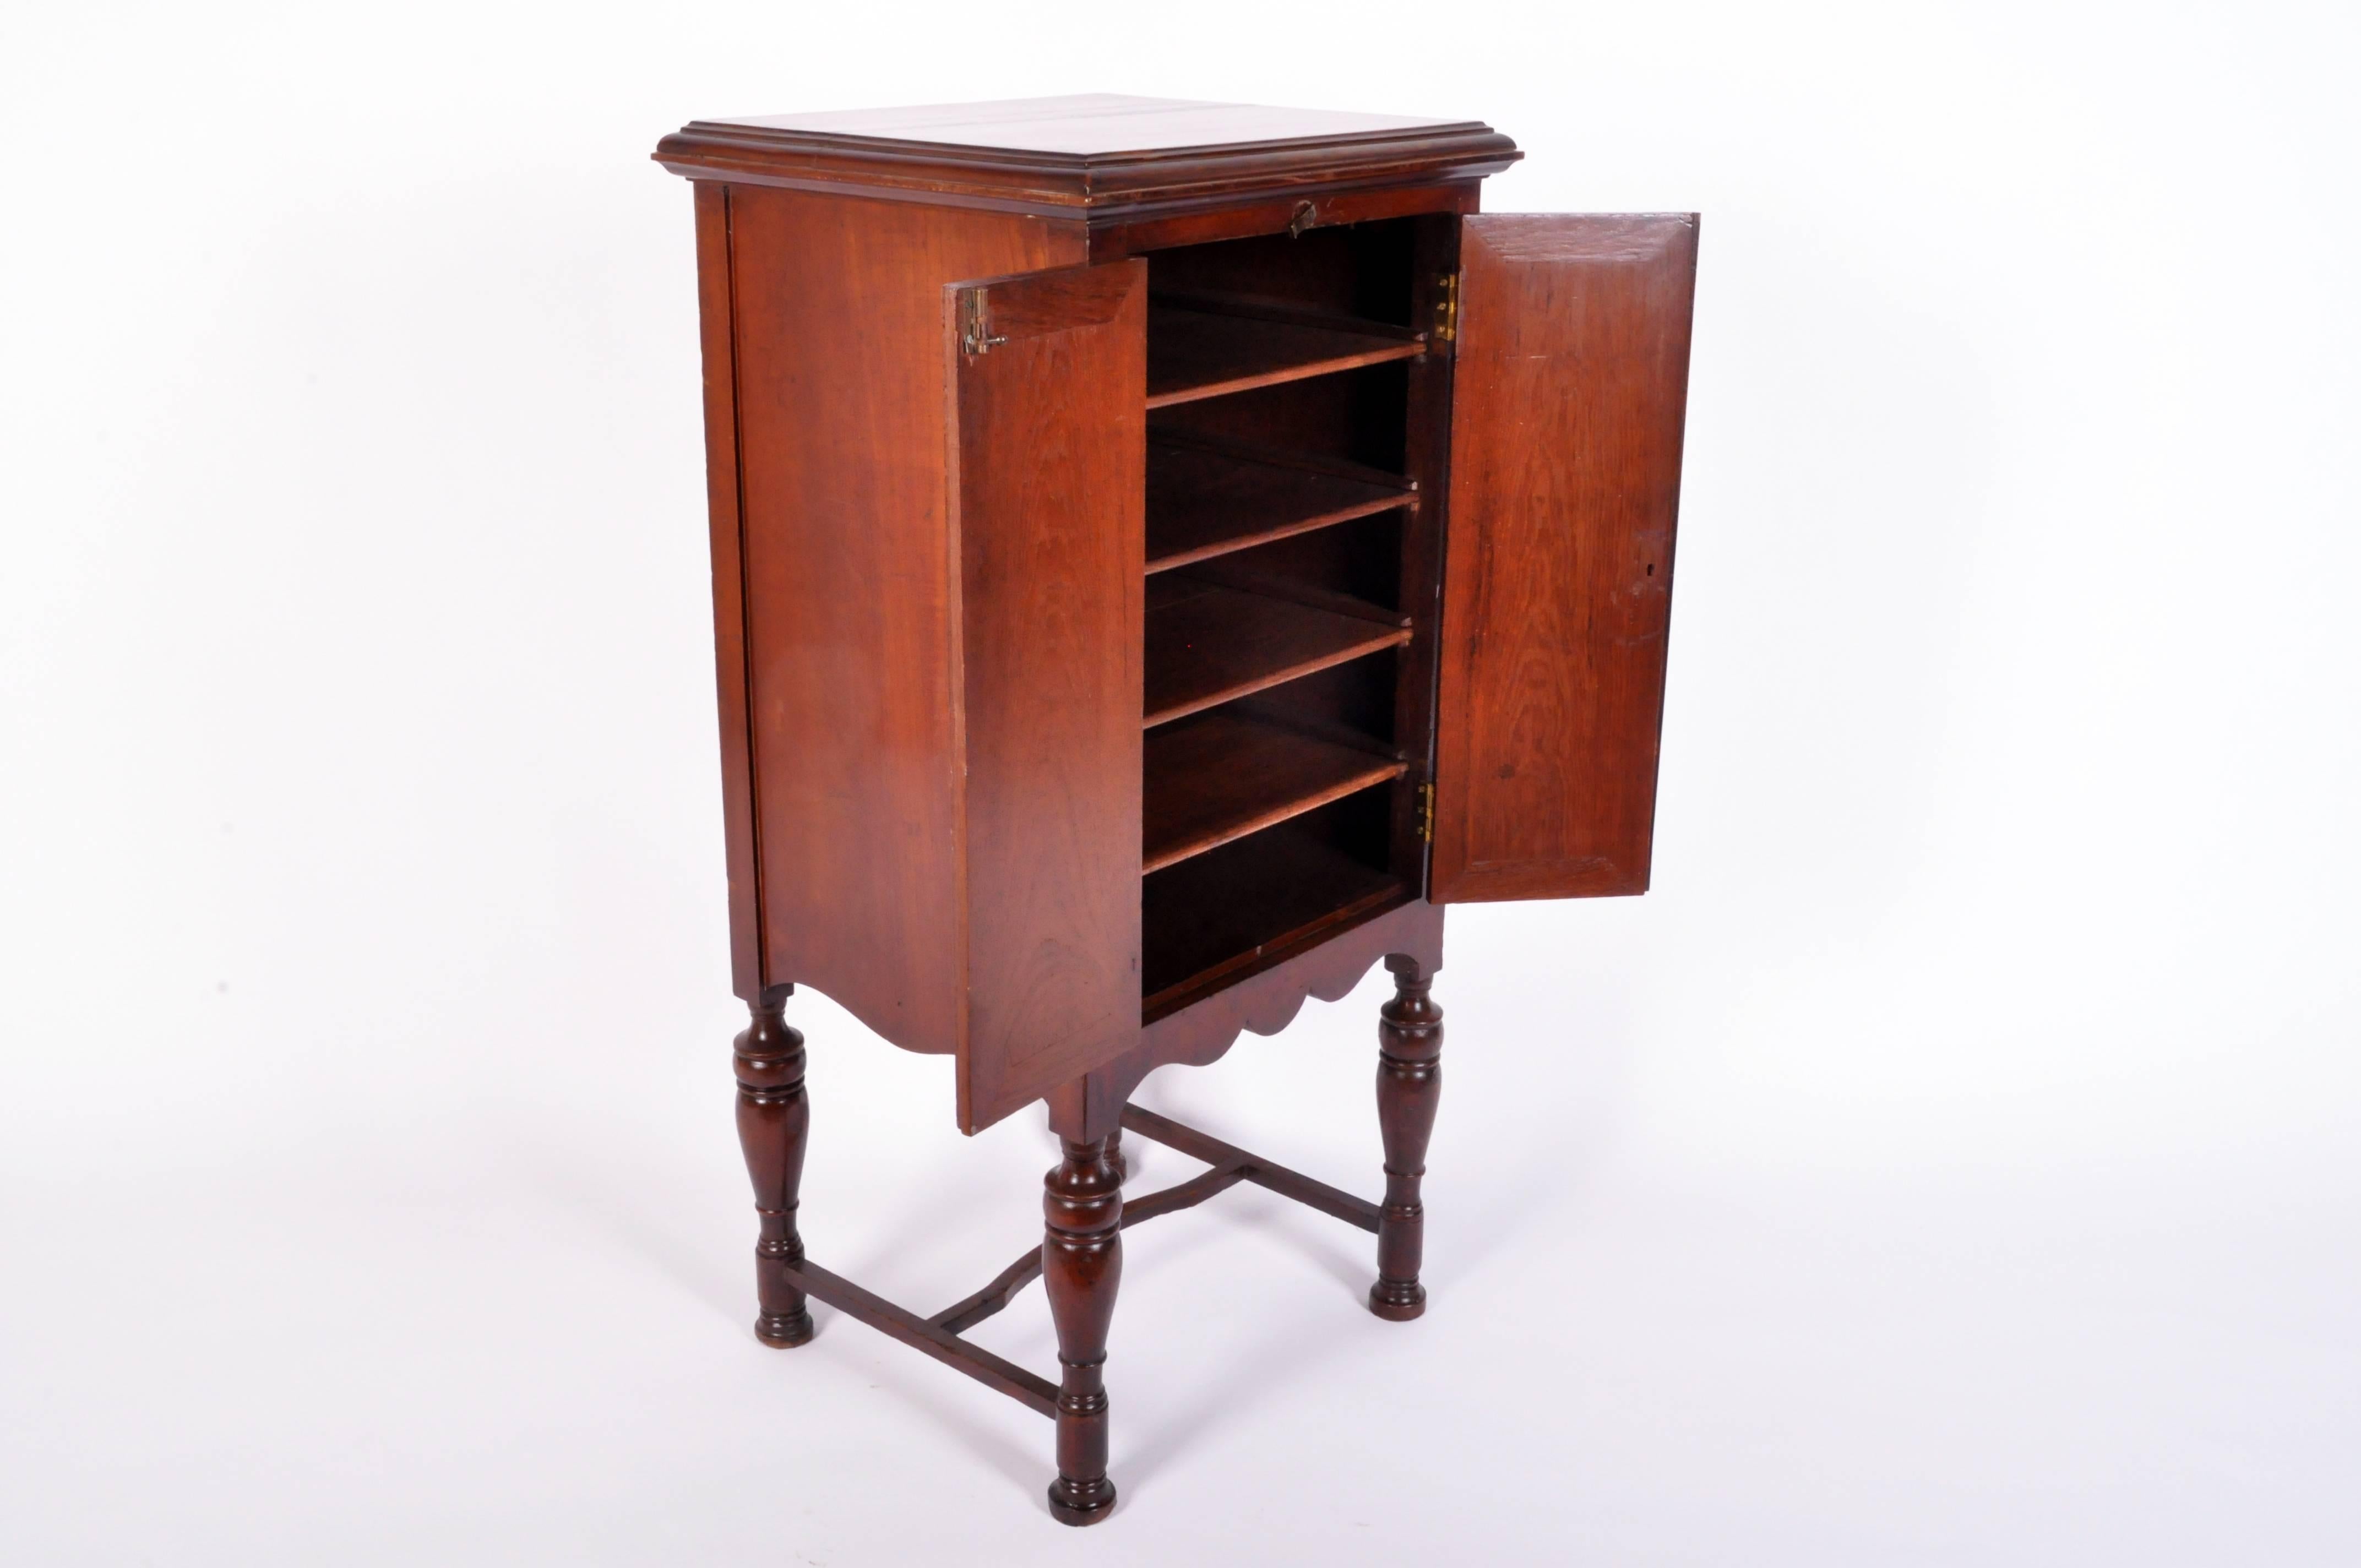 This British Colonial music cabinet is from Myanmar circa 1910 and is made from teakwood.